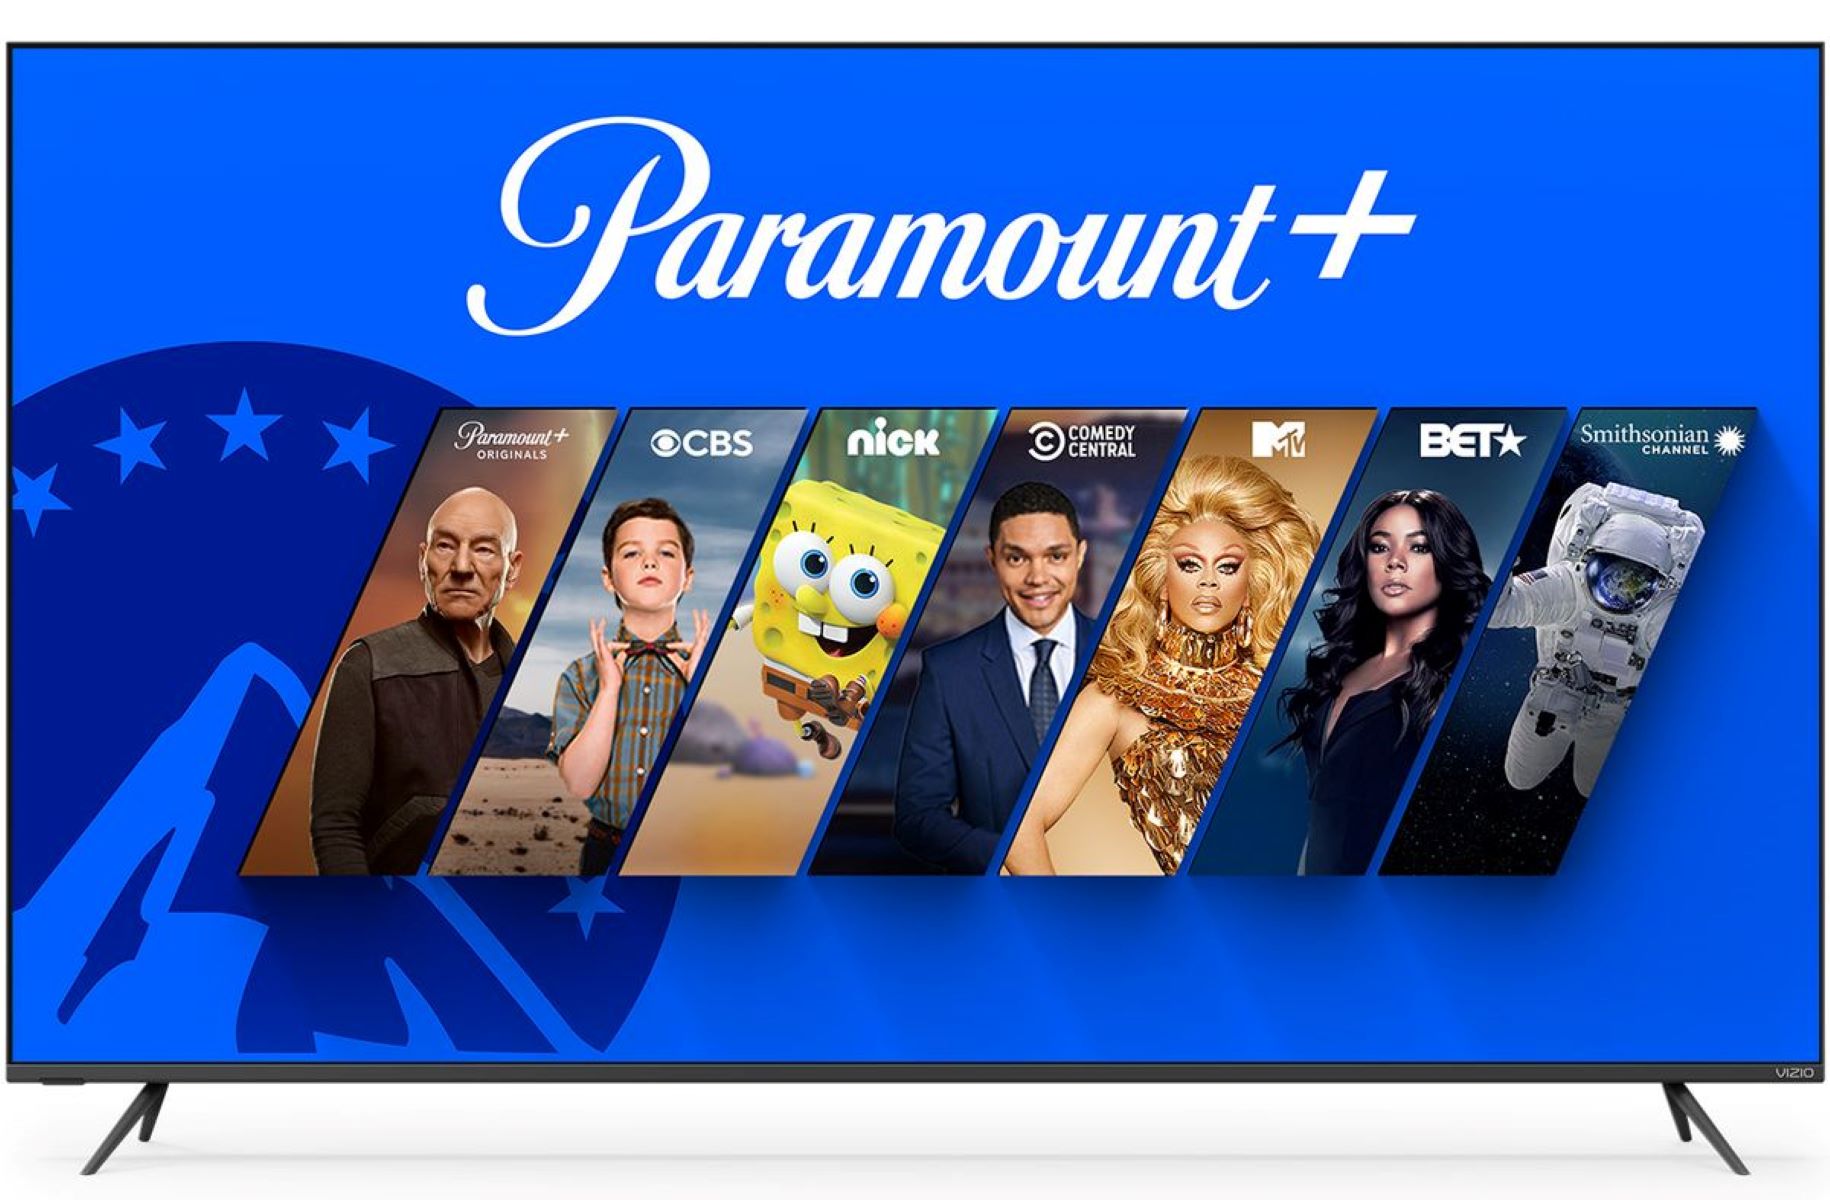 How To Watch Paramount On TV